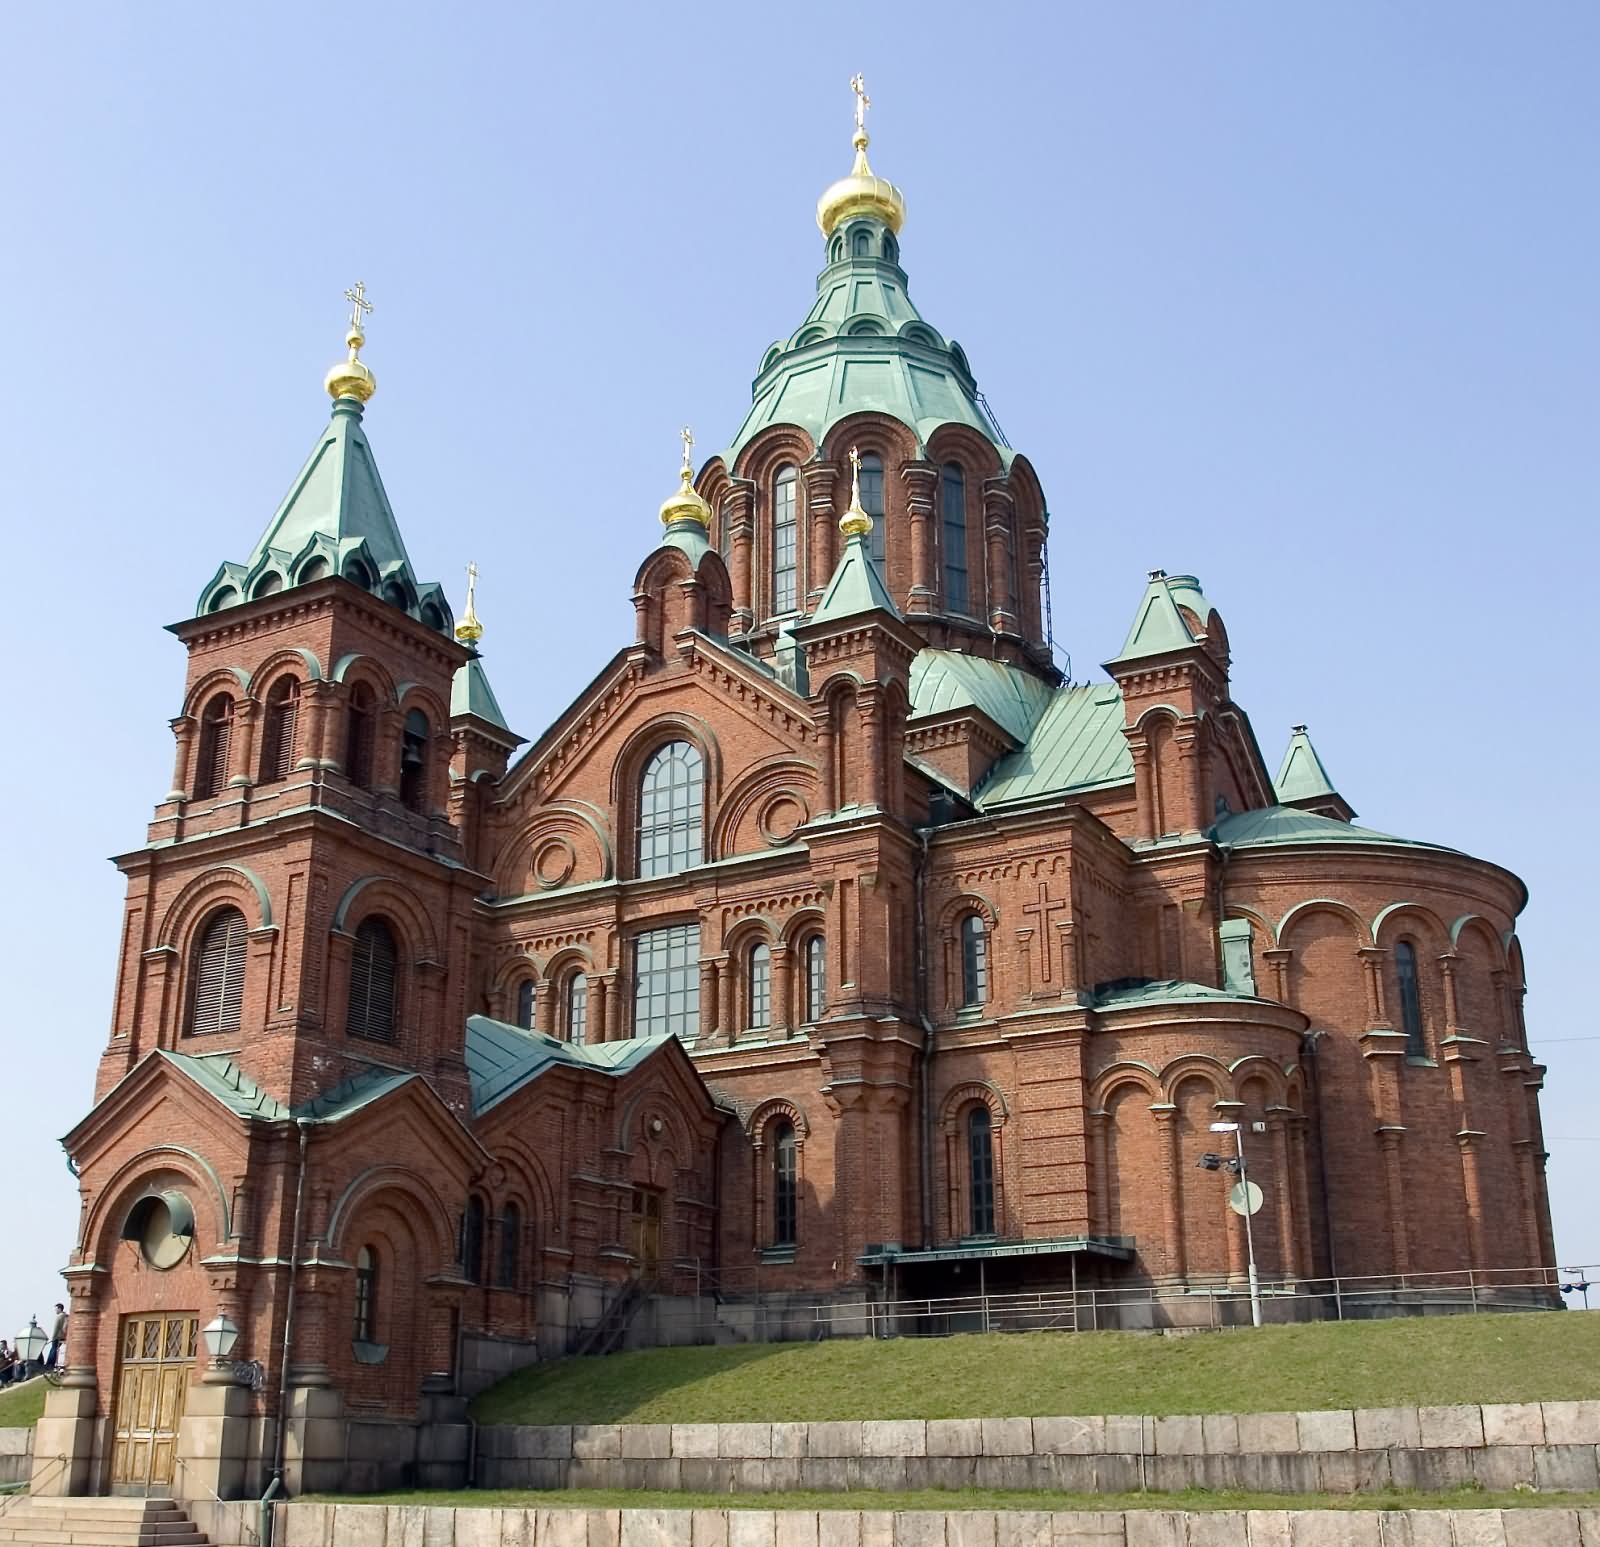 Adorable Side View Of The Uspenski Cathedral In Helsinki, Finland